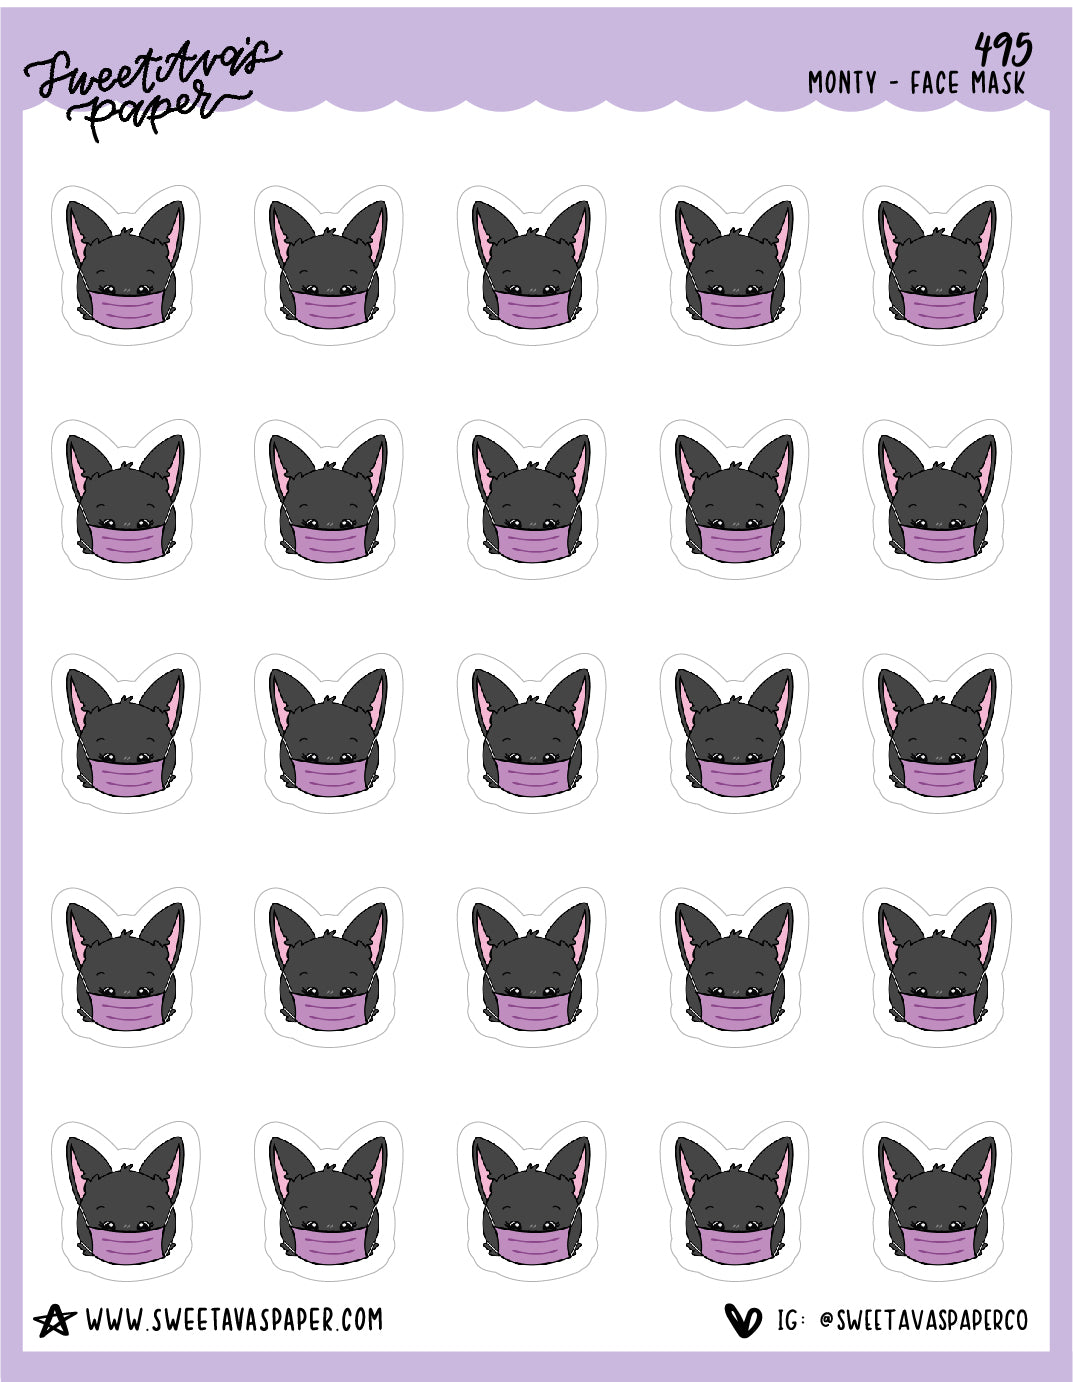 Face Mask Planner Stickers - Monty The Bat - [495]